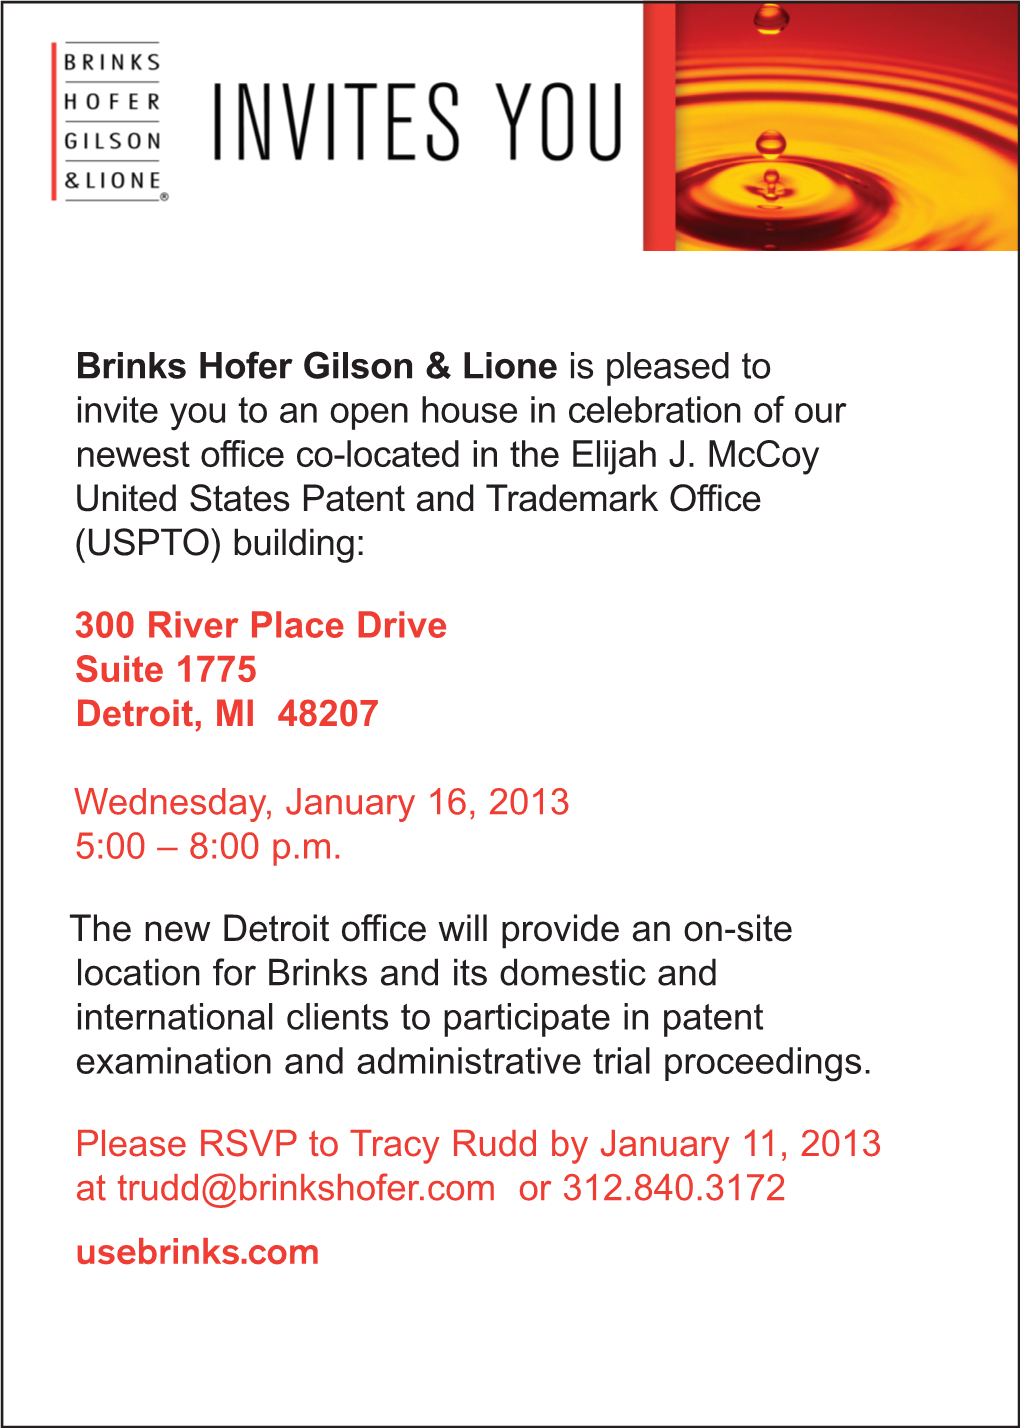 Brinks Hofer Gilson & Lione Is Pleased to Invite You to an Open House In